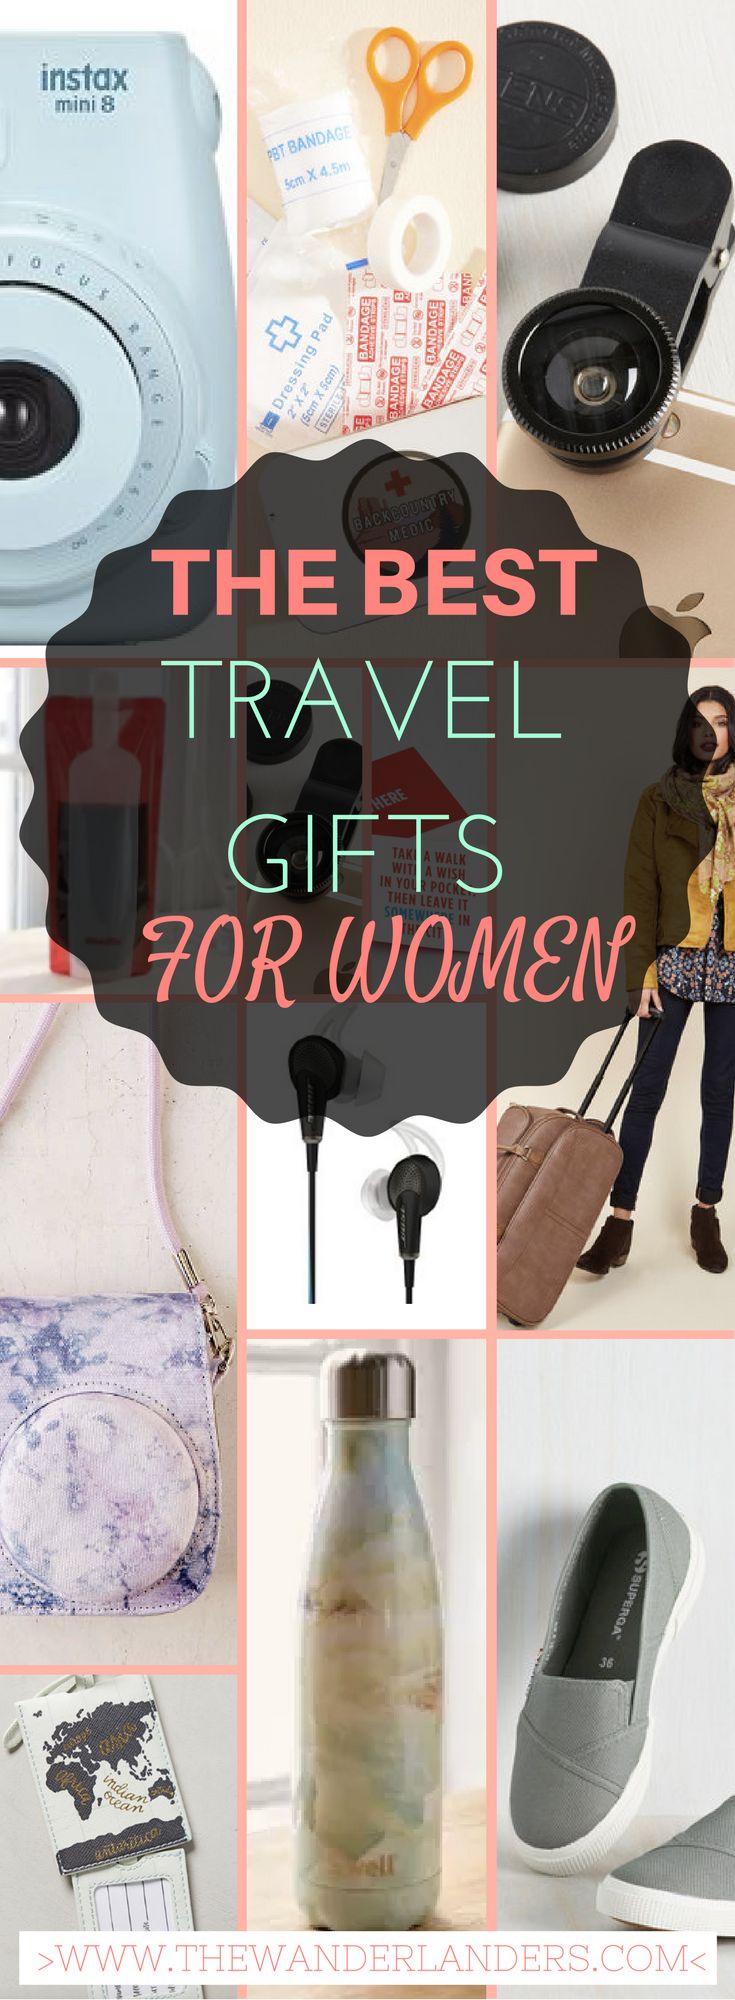 Great list of travel themed gifts for women at a variety of prices. Love it!…